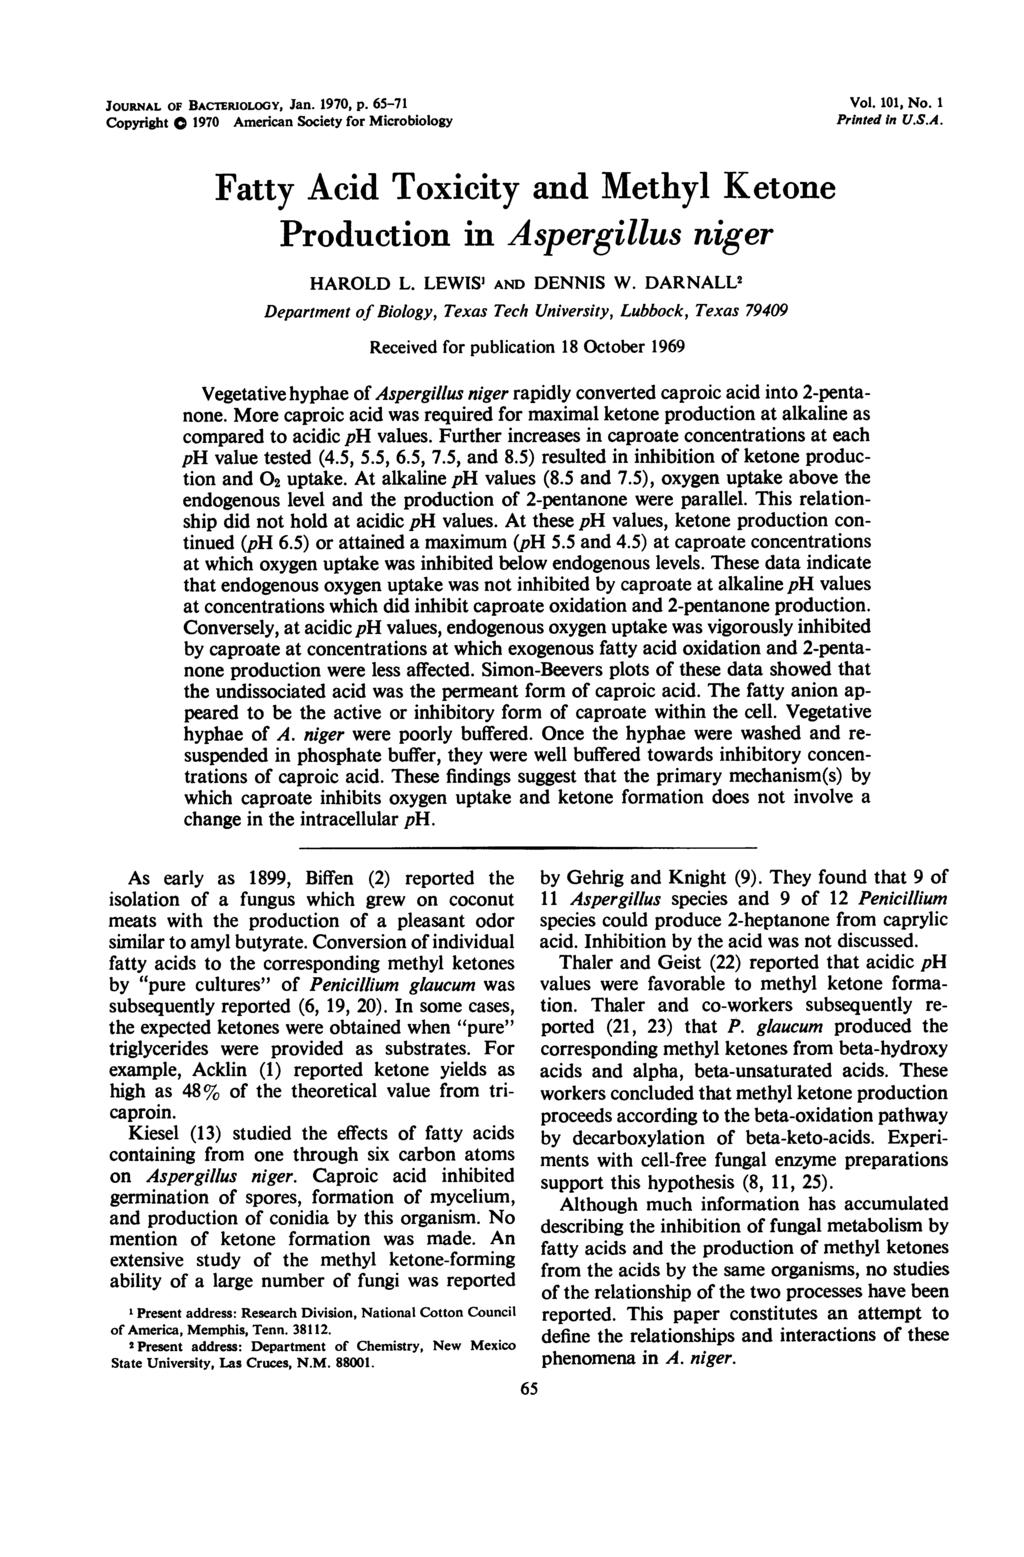 JOURNAL OF BACTERIOLOGY, Jan. 197, p. 65-71 Vol. 11, No. 1 Copyright 197 American Society for Microbiology Printed in U.S.A. Fatty Acid Toxicity and Methyl Ketone Production in Aspergillus niger HAROLD L.